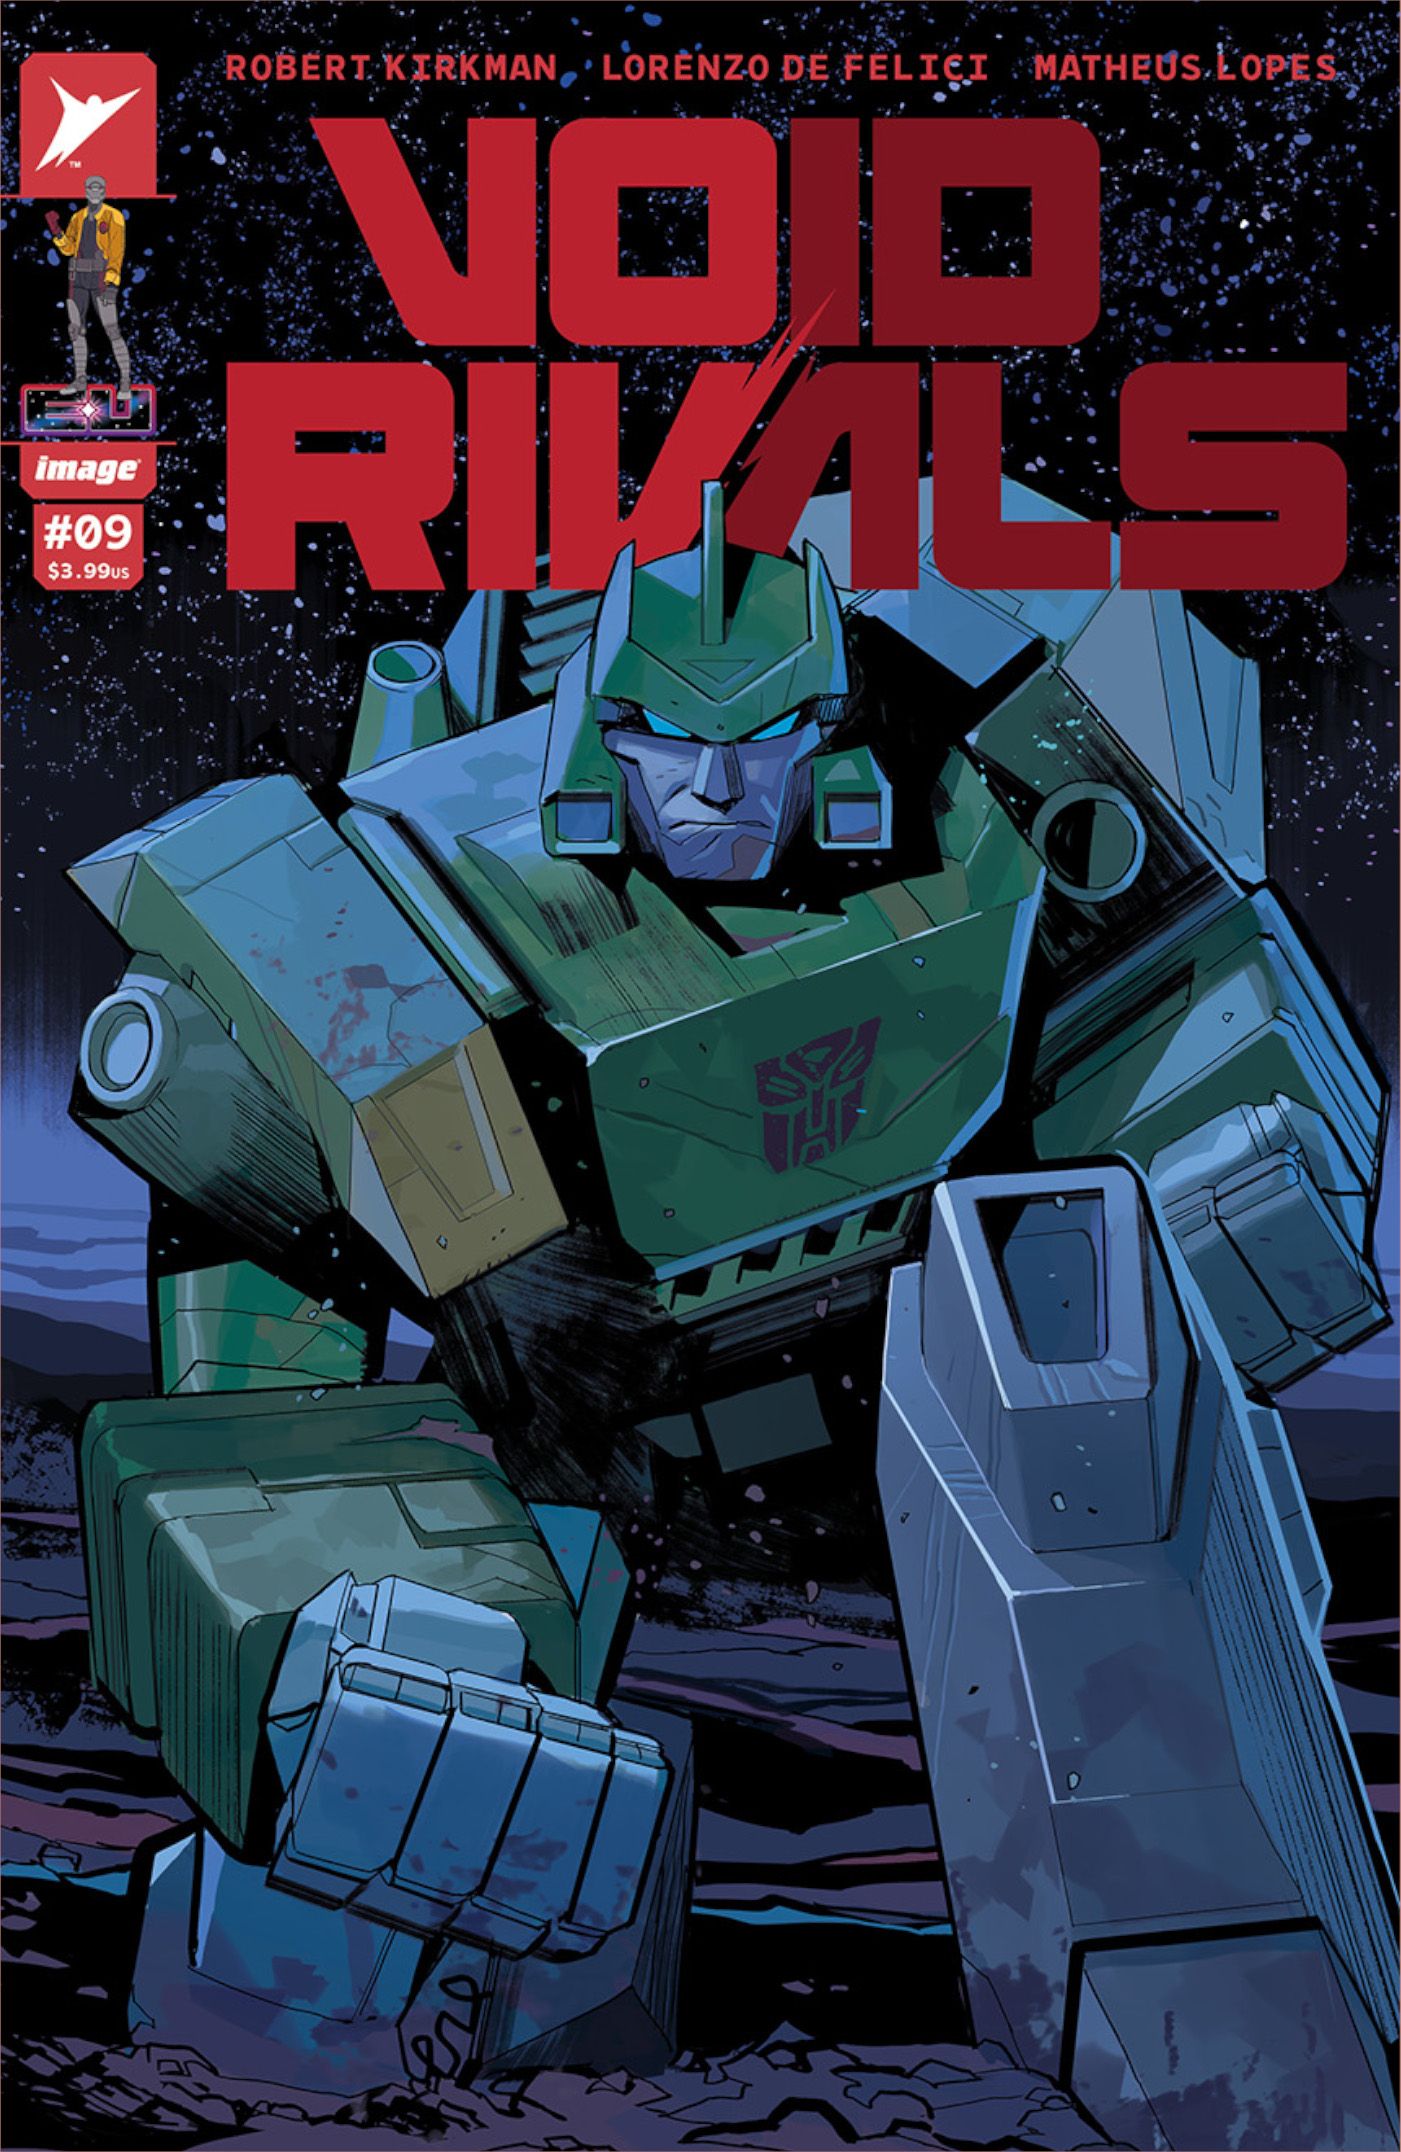 Void Rivals #9 Cover by Lorenzo de Felici, featuring the Autobot Springer